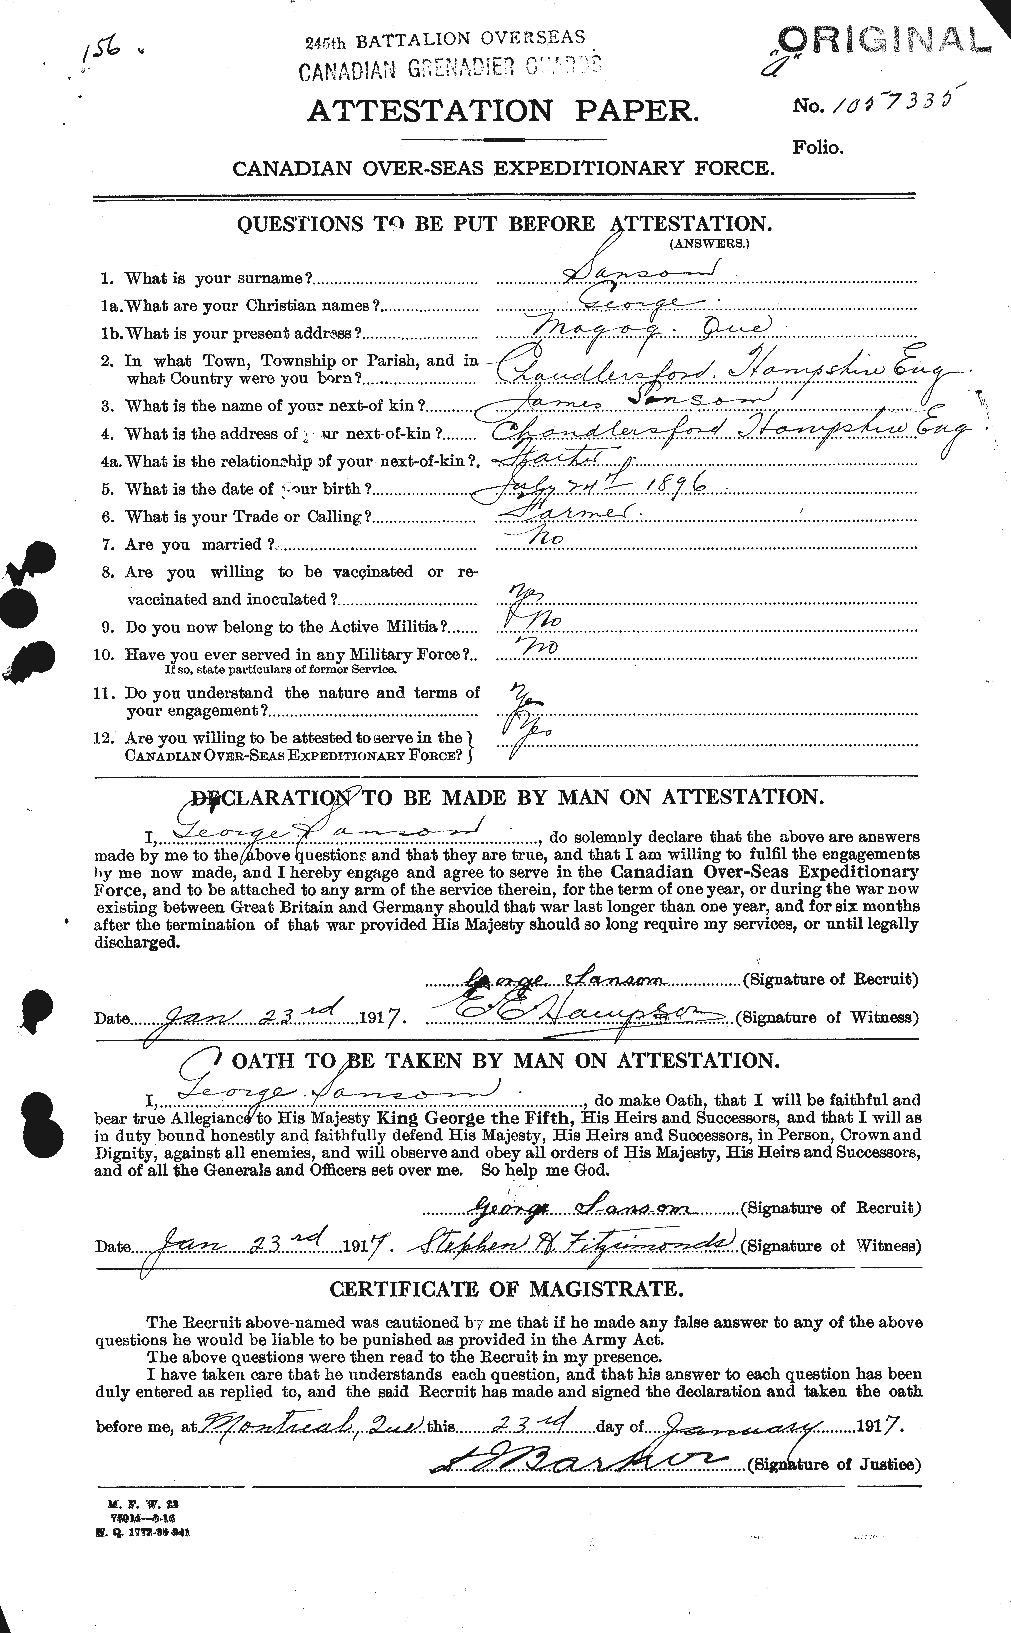 Personnel Records of the First World War - CEF 081400a